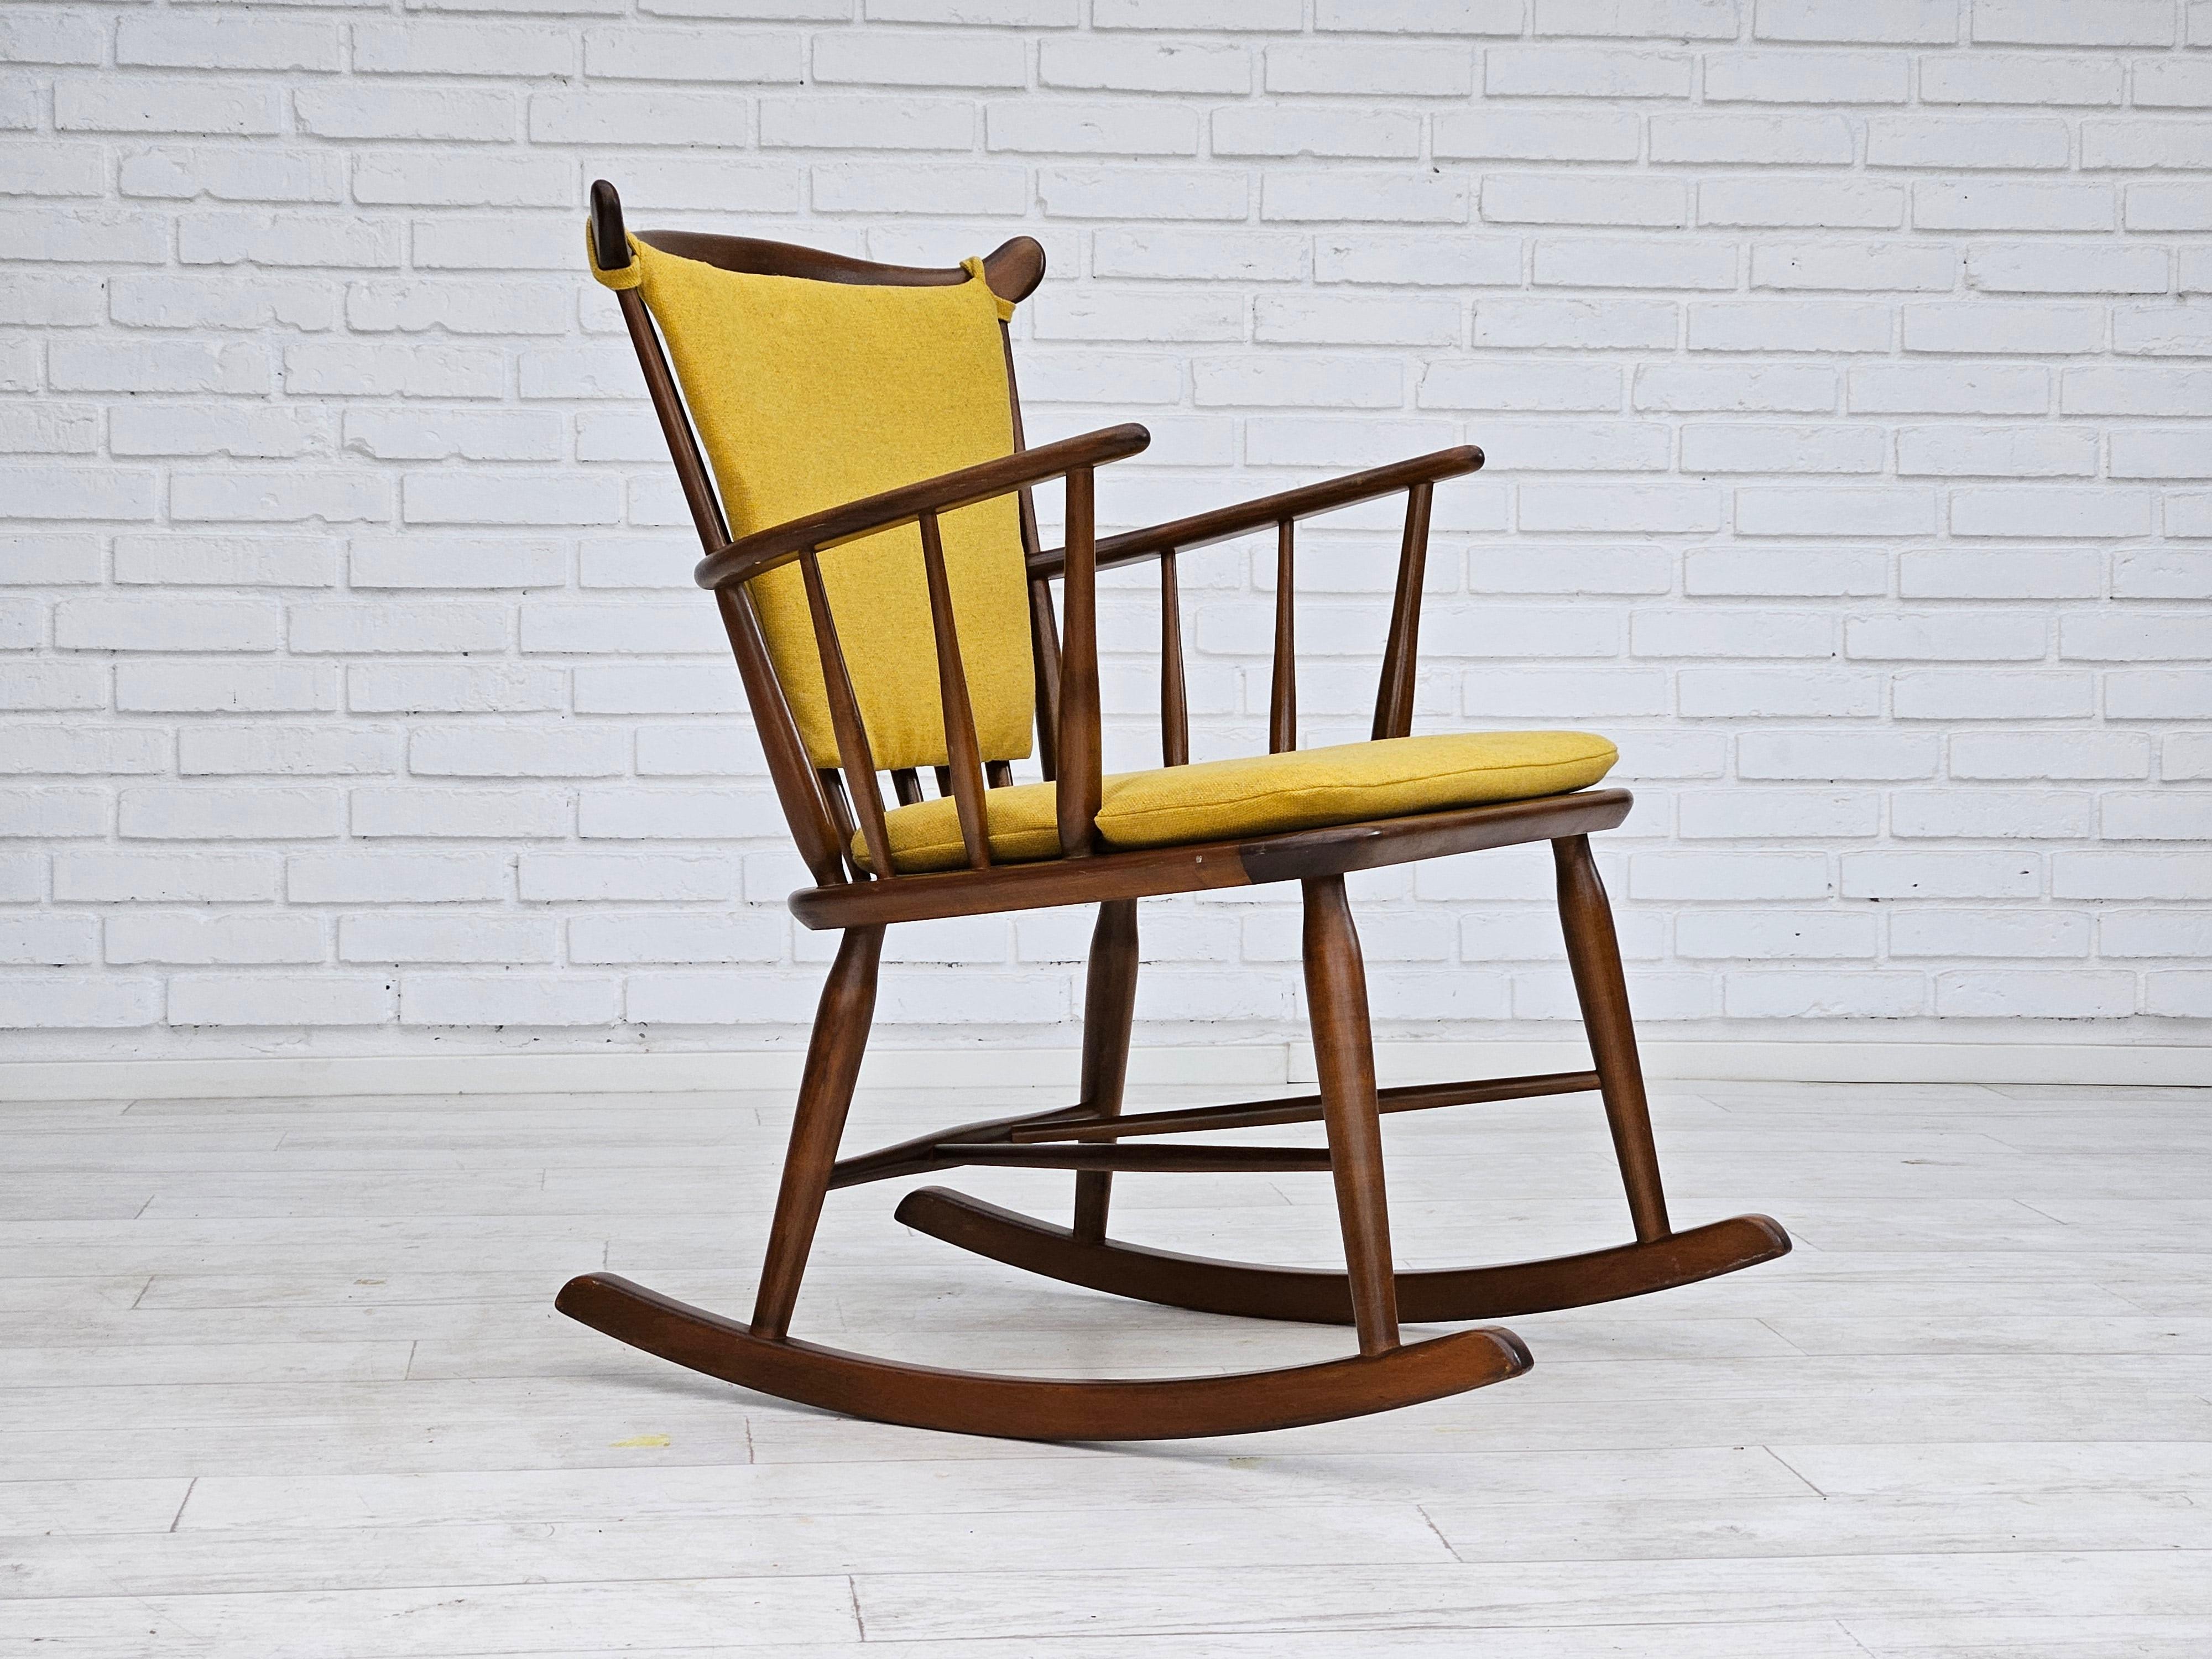 1960-70s, Danish design by Farstrup Stolefabrik. Reupholstered rocking chair. Yellow furniture wool, renewed beech wood. Reupholstered by craftsman. Manufactured by Danish furniture manufacturer Farstrup Stolefabrik in about 1965.